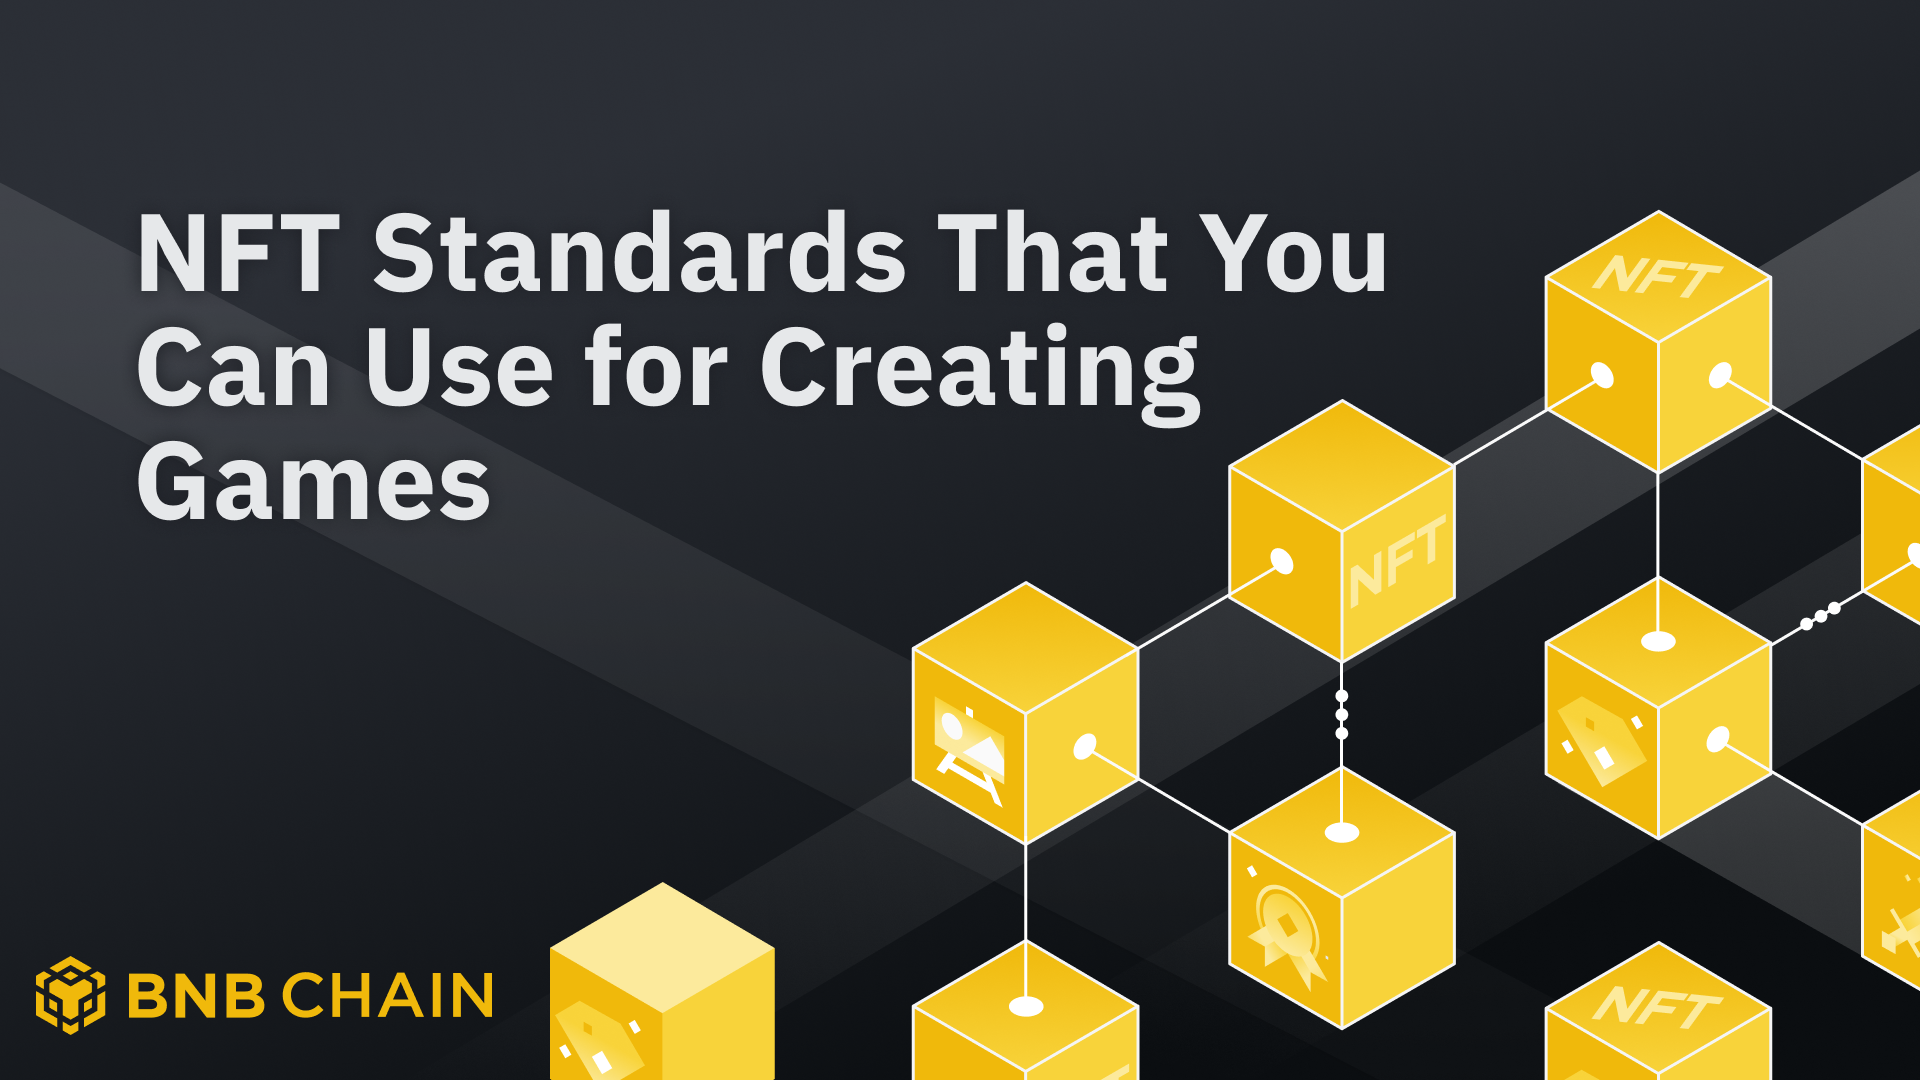 NFT Standards that You Can Use for Creating Games